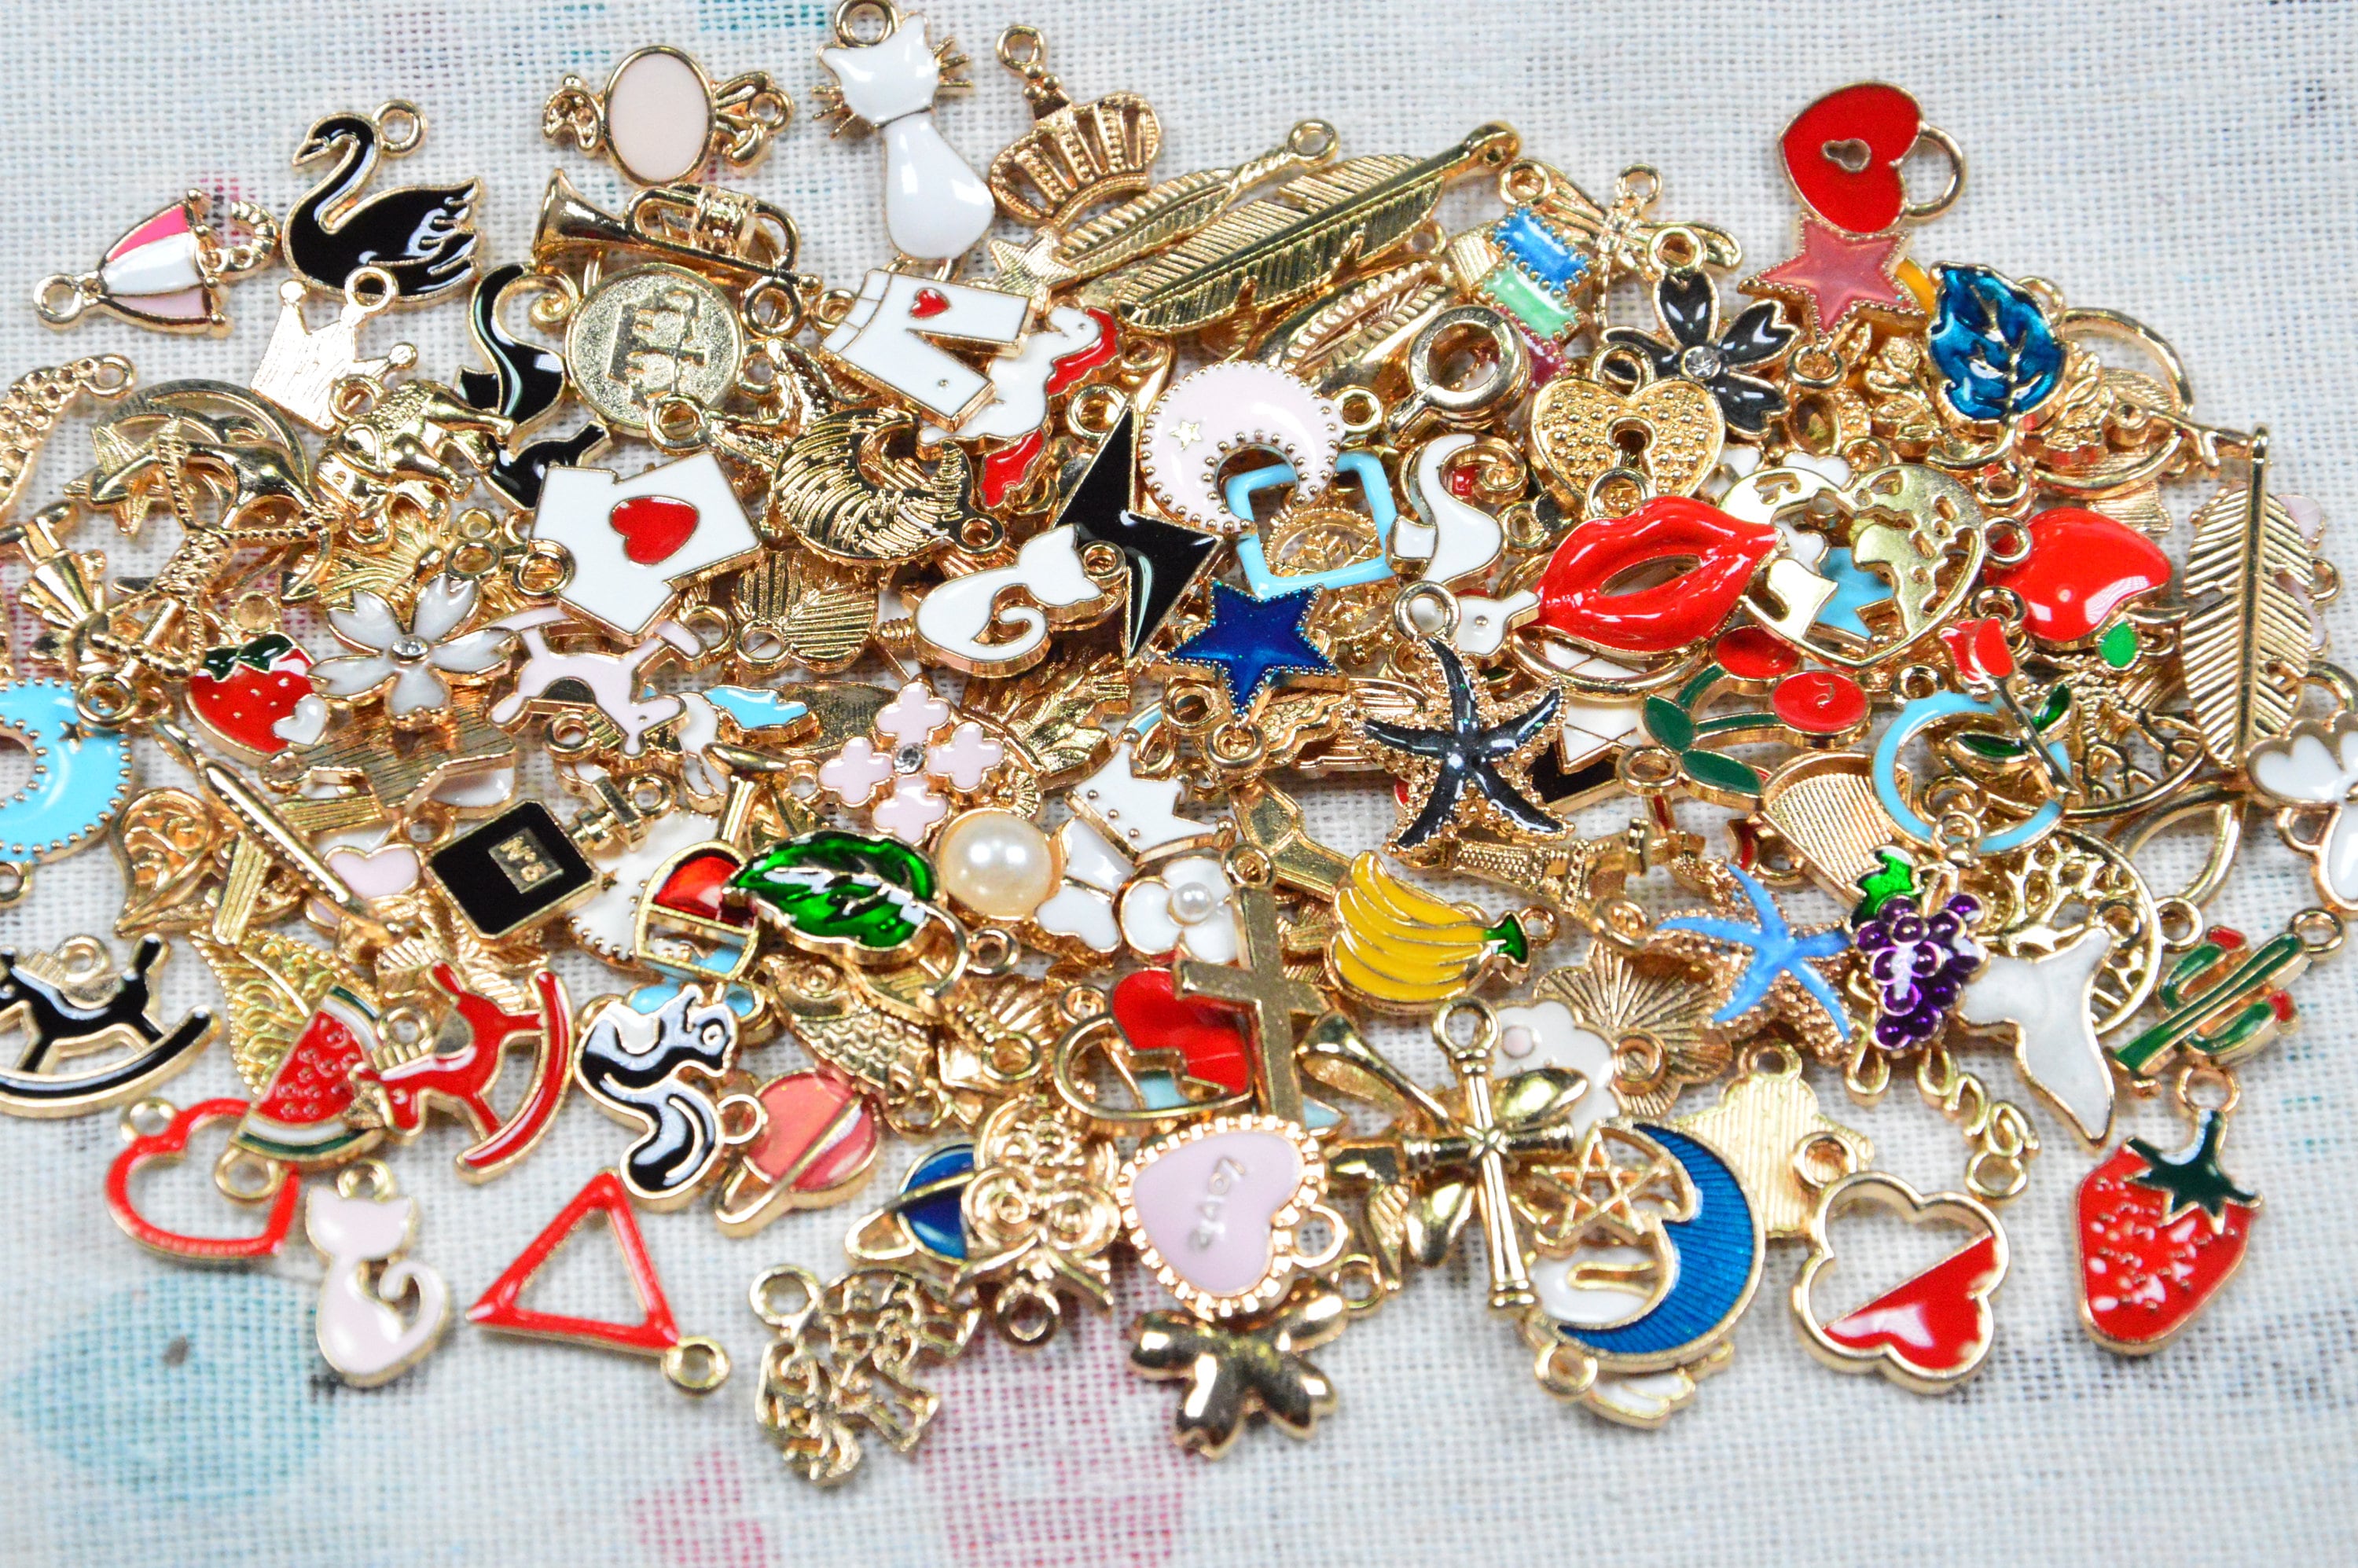 300pcs Charms for Jewelry Making, Wholesale Bulk Assorted Gold-Plated Enamel Charms Earring Charms for DIY Necklace Bracelet Jewelry Making and